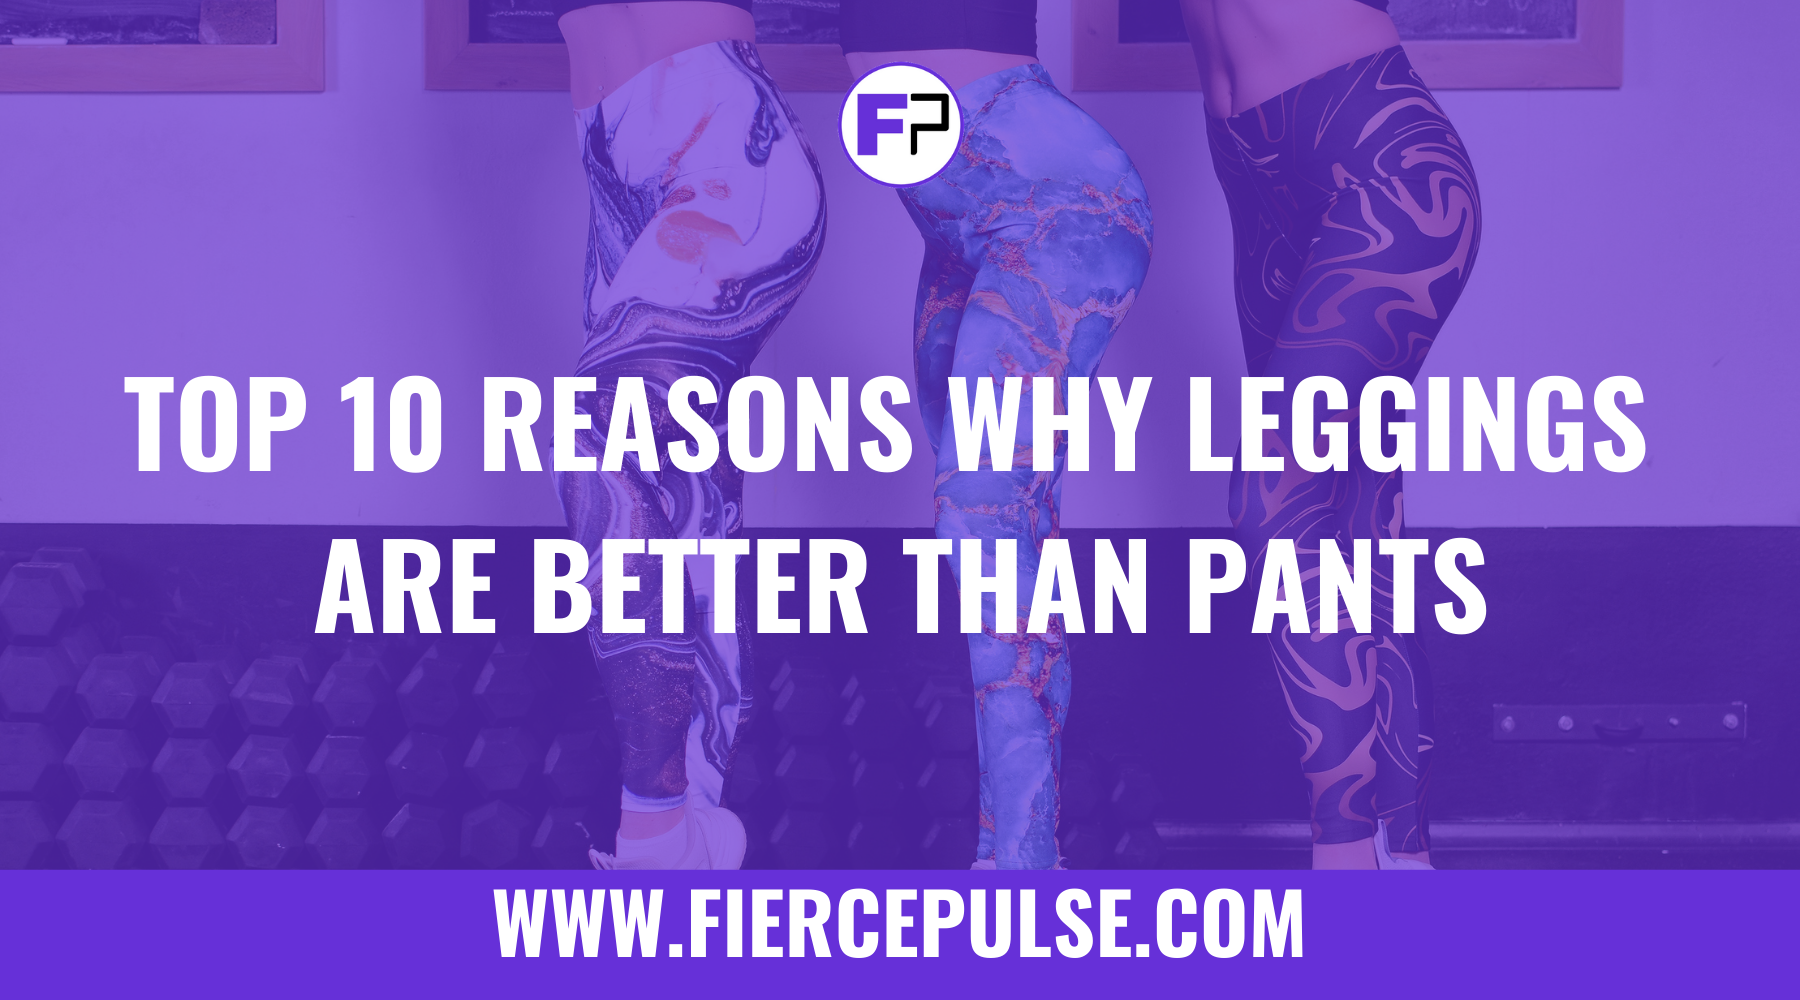 The Many Benefits Of Compression Leggings For Women